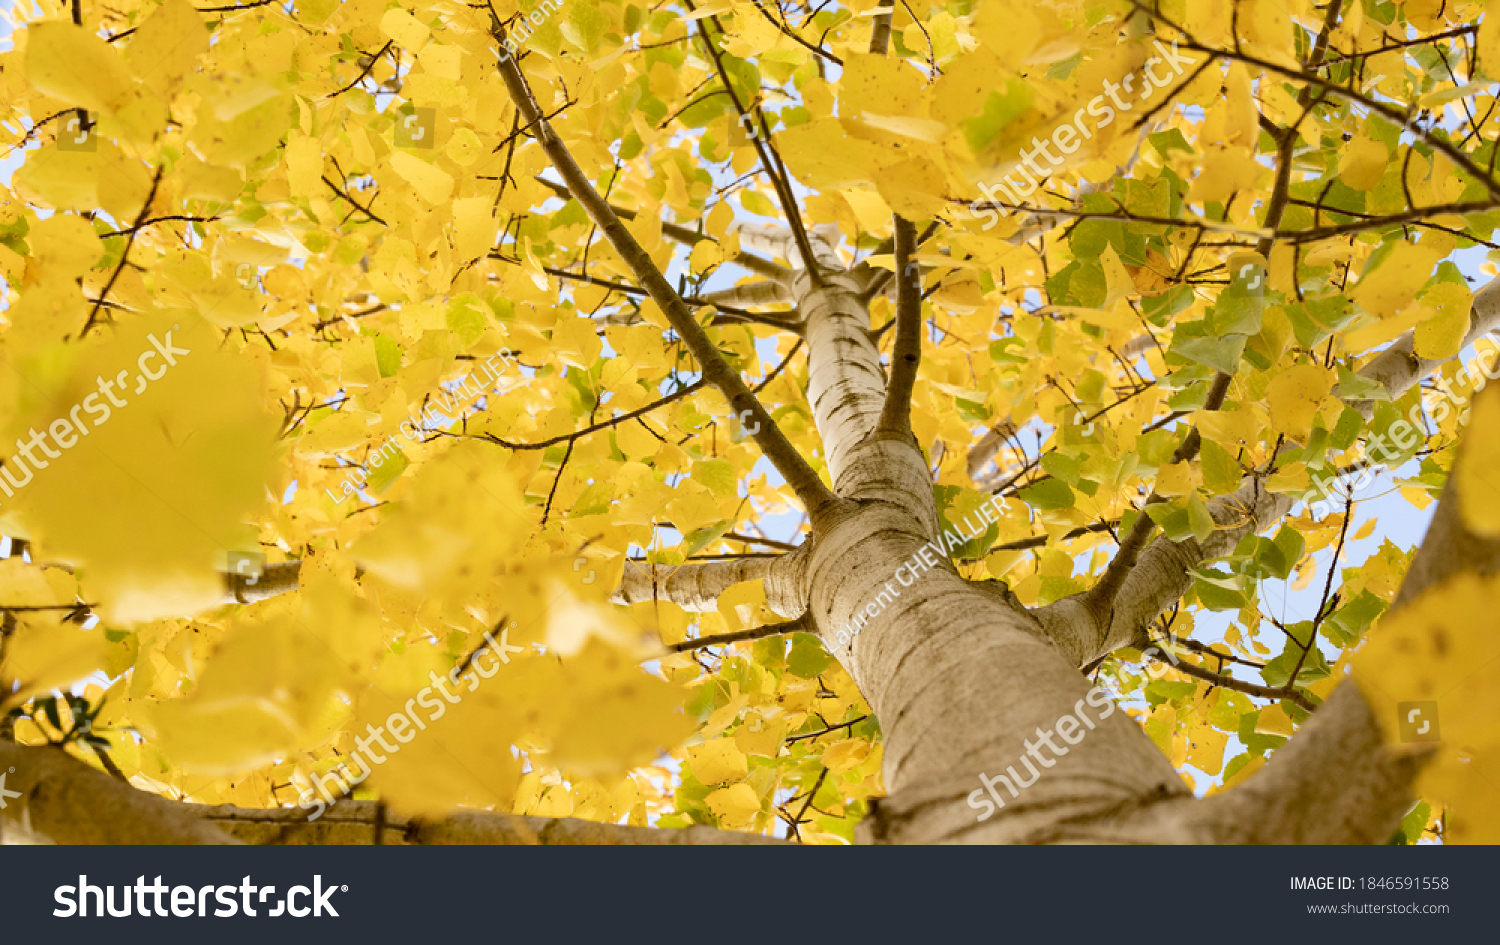 Common aspen or quaking aspen (Populus tremula). Beautiful tree from Europe. Yellow leaves in autumn. Golden tree. Morning lights #1846591558